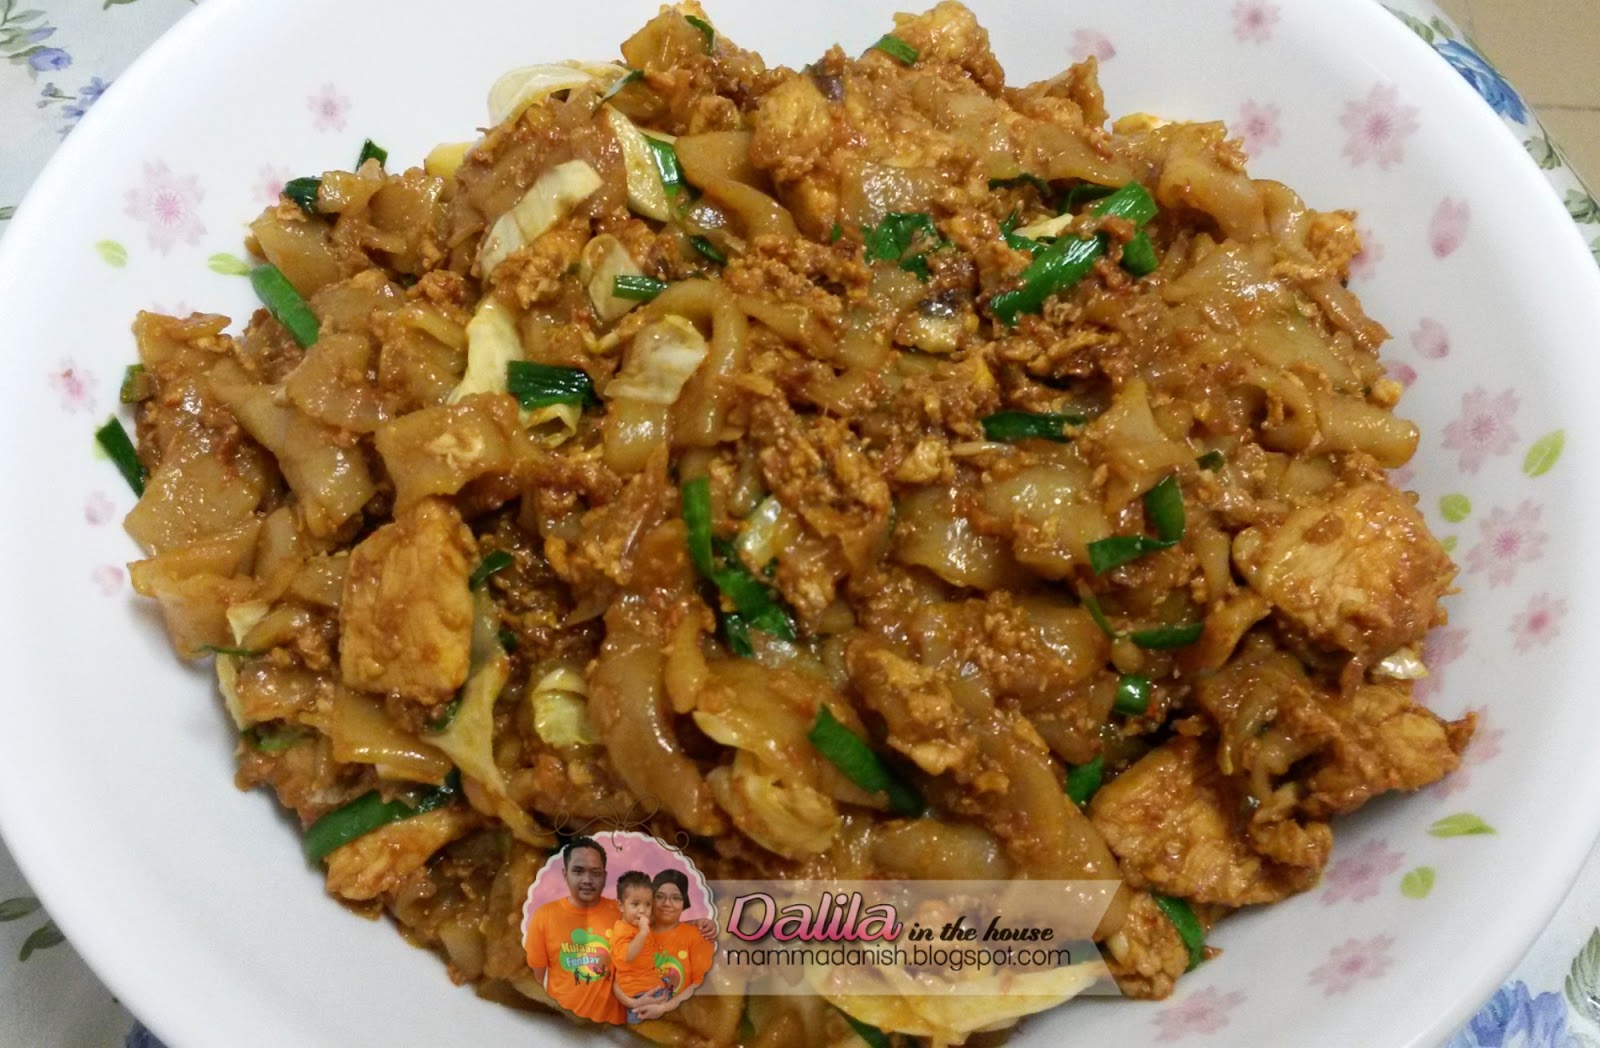 dalila in the house..: Resepi Kuey Teow Goreng Simple n Sedap